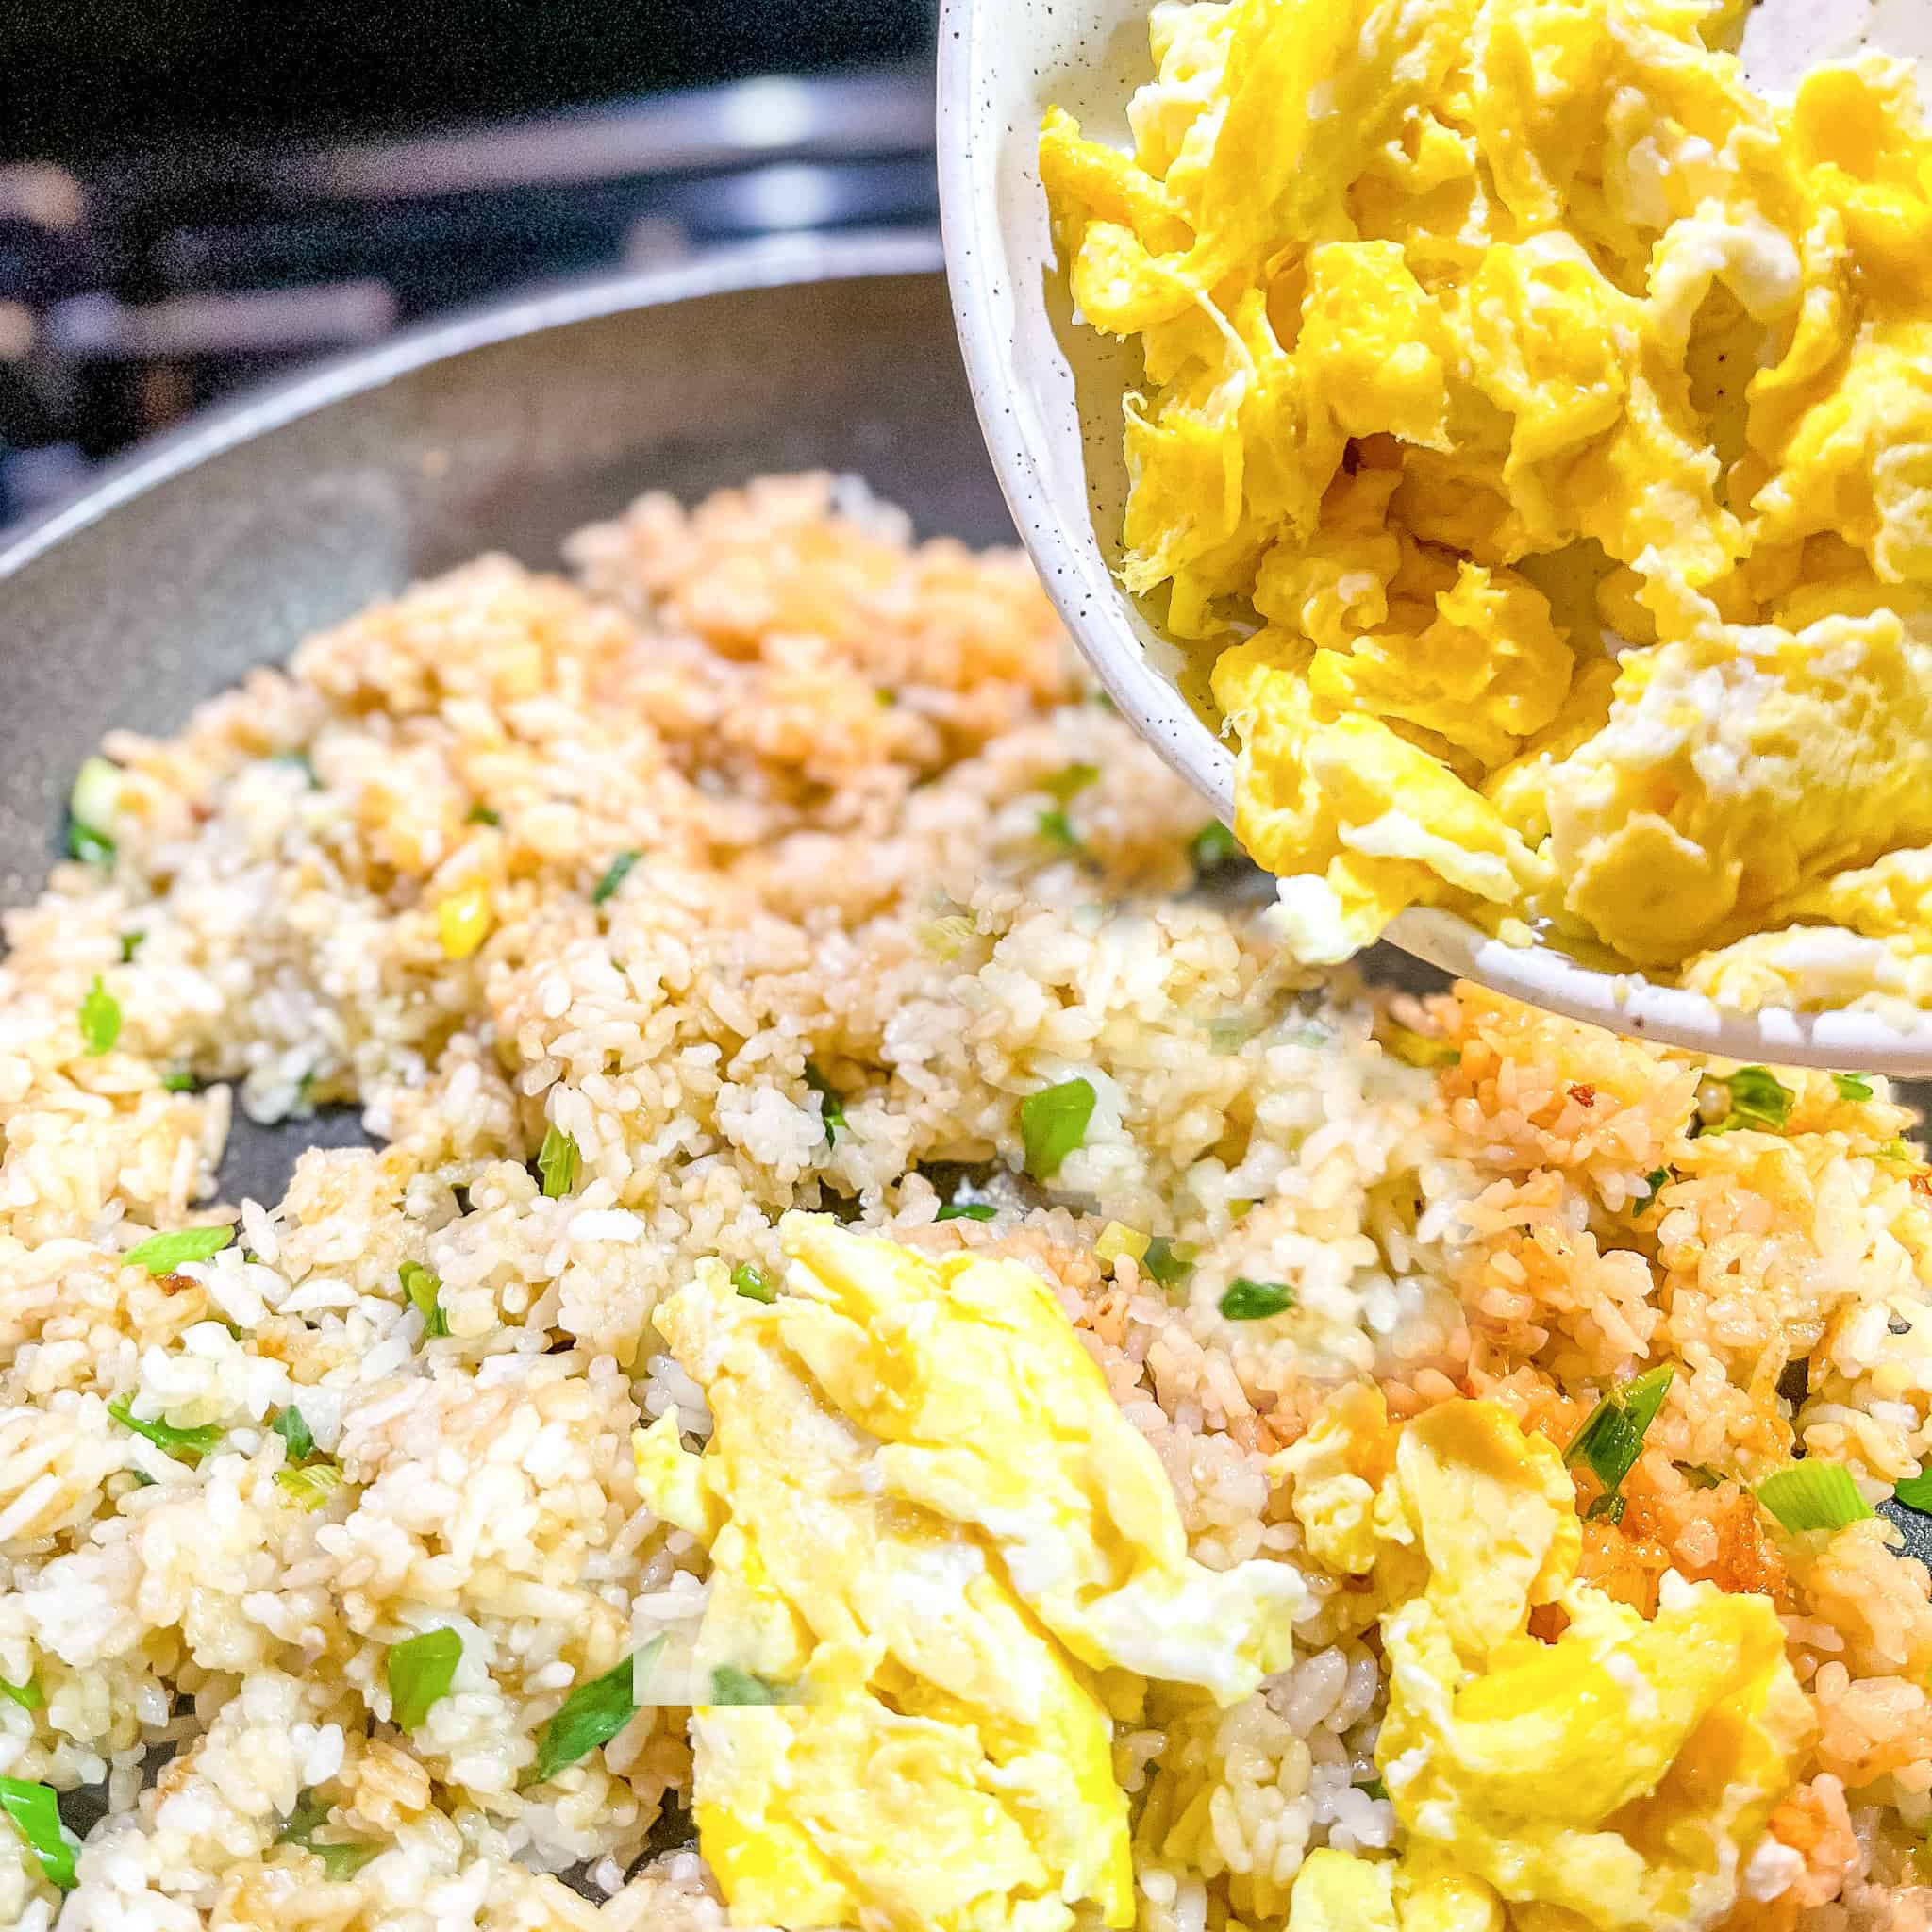 Adding eggs to fried rice.